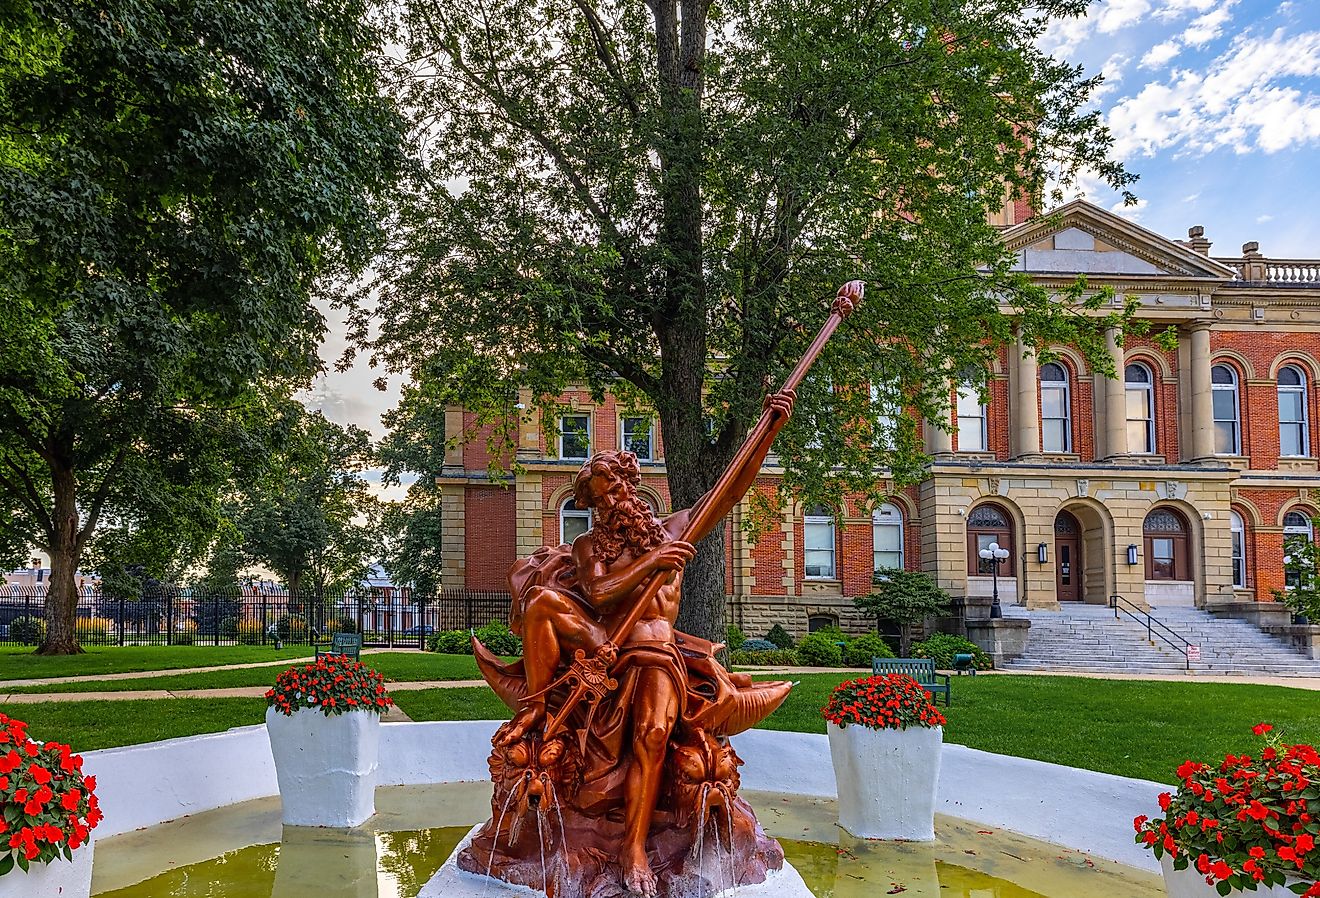 The Elkhart County Courthouse and it is Neptune Fountain in Goshen, Indiana. Image credit Roberto Galan via Shutterstock